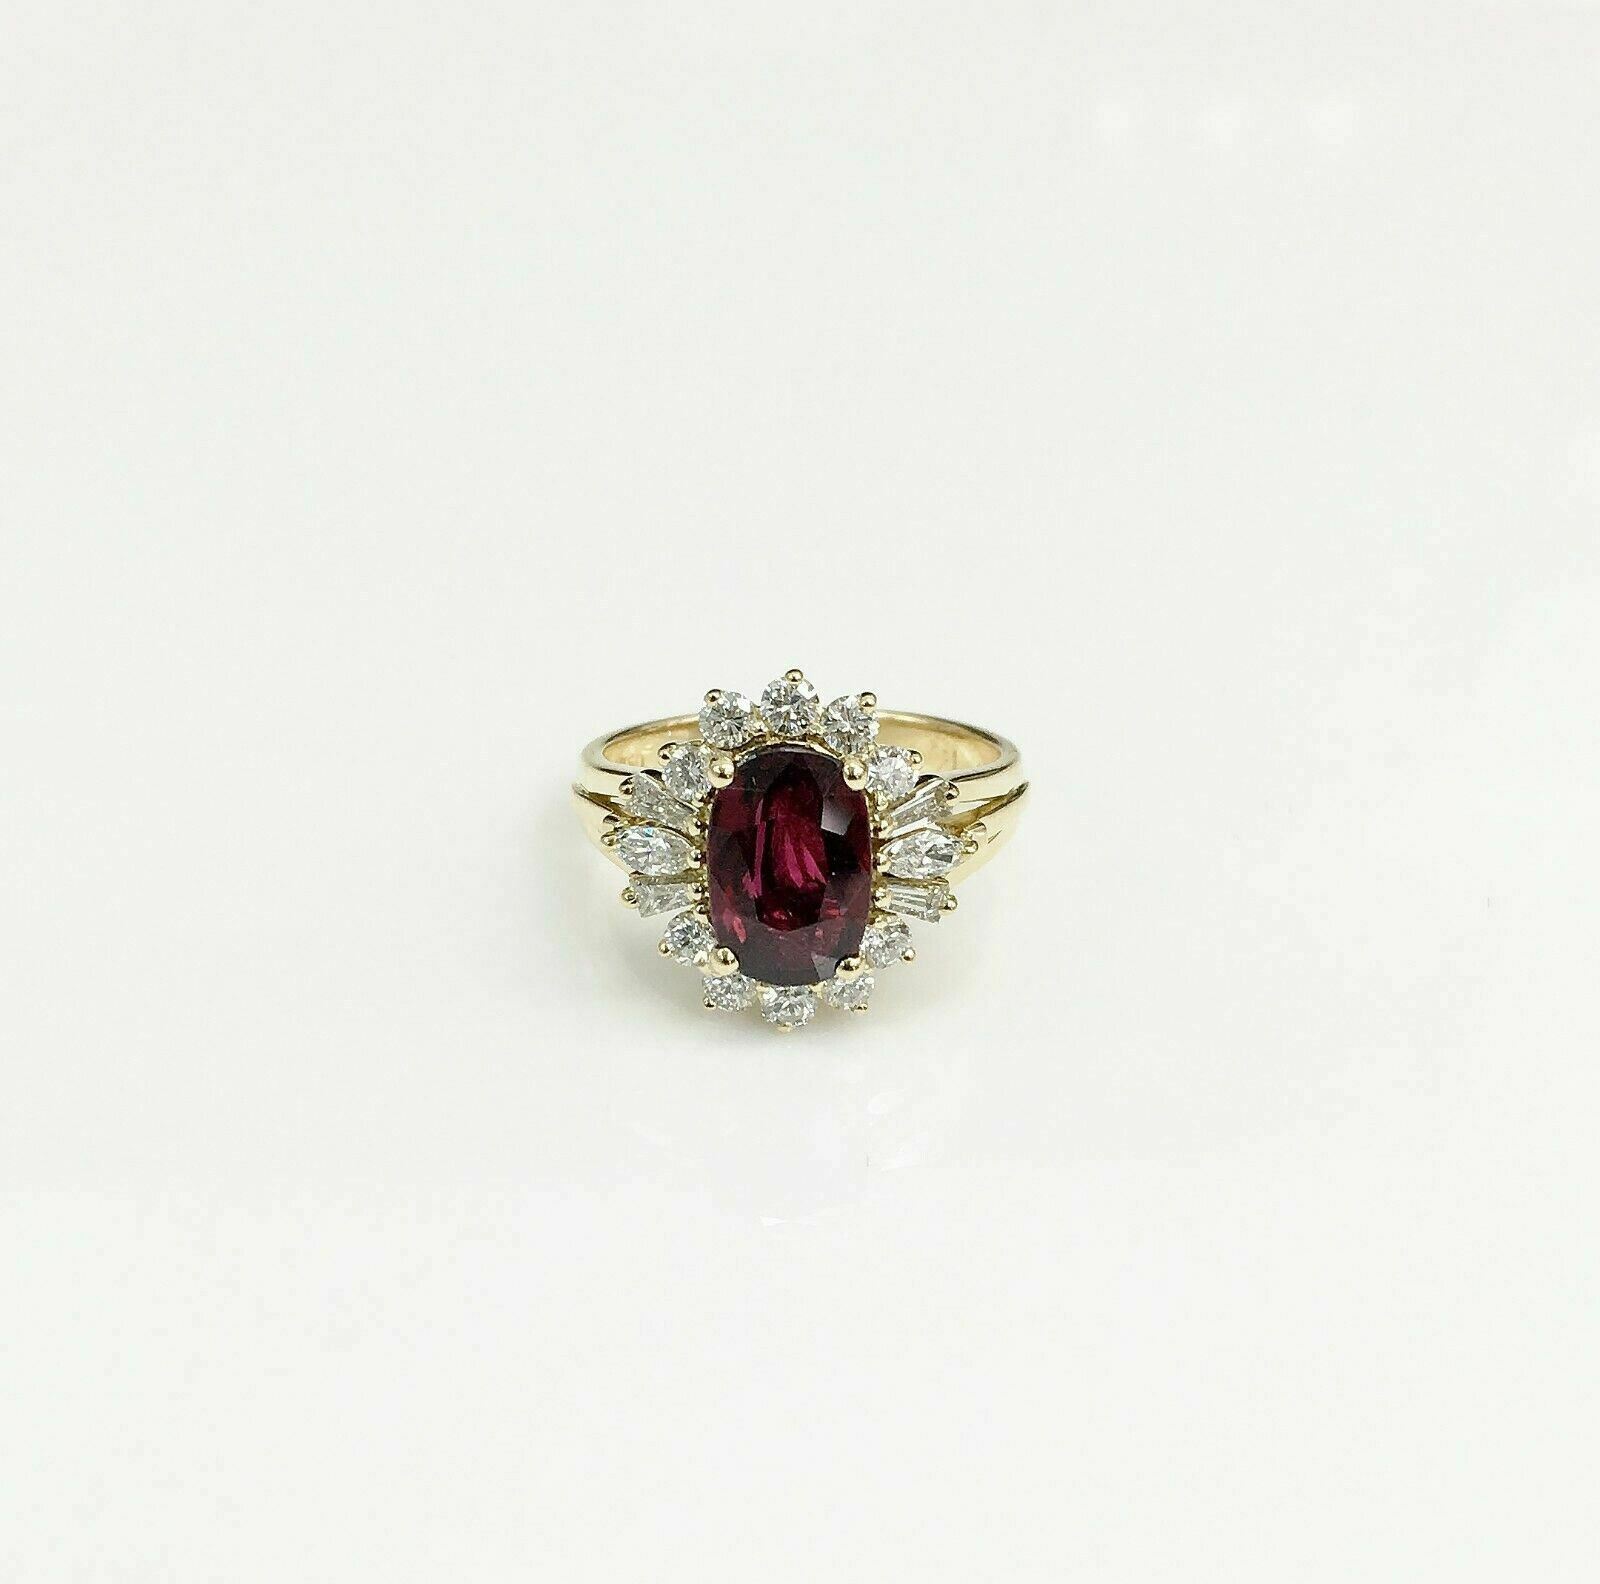 2.09 Carats t.w. Diamond and Ruby Ring Ruby is 1.59 Carats AGL Lab Report